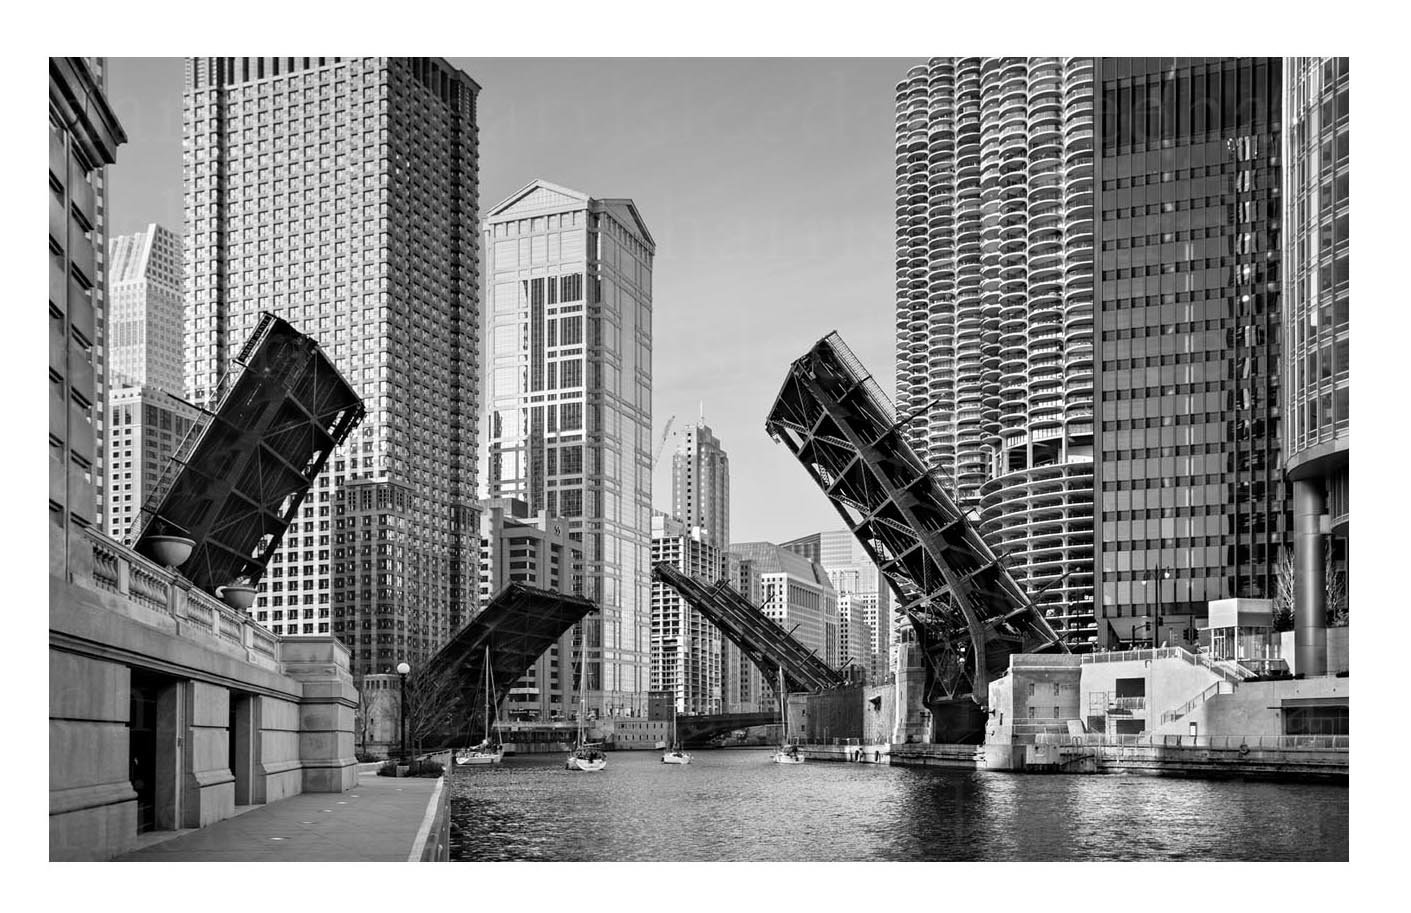 Wabash Avenue at the Chicago River